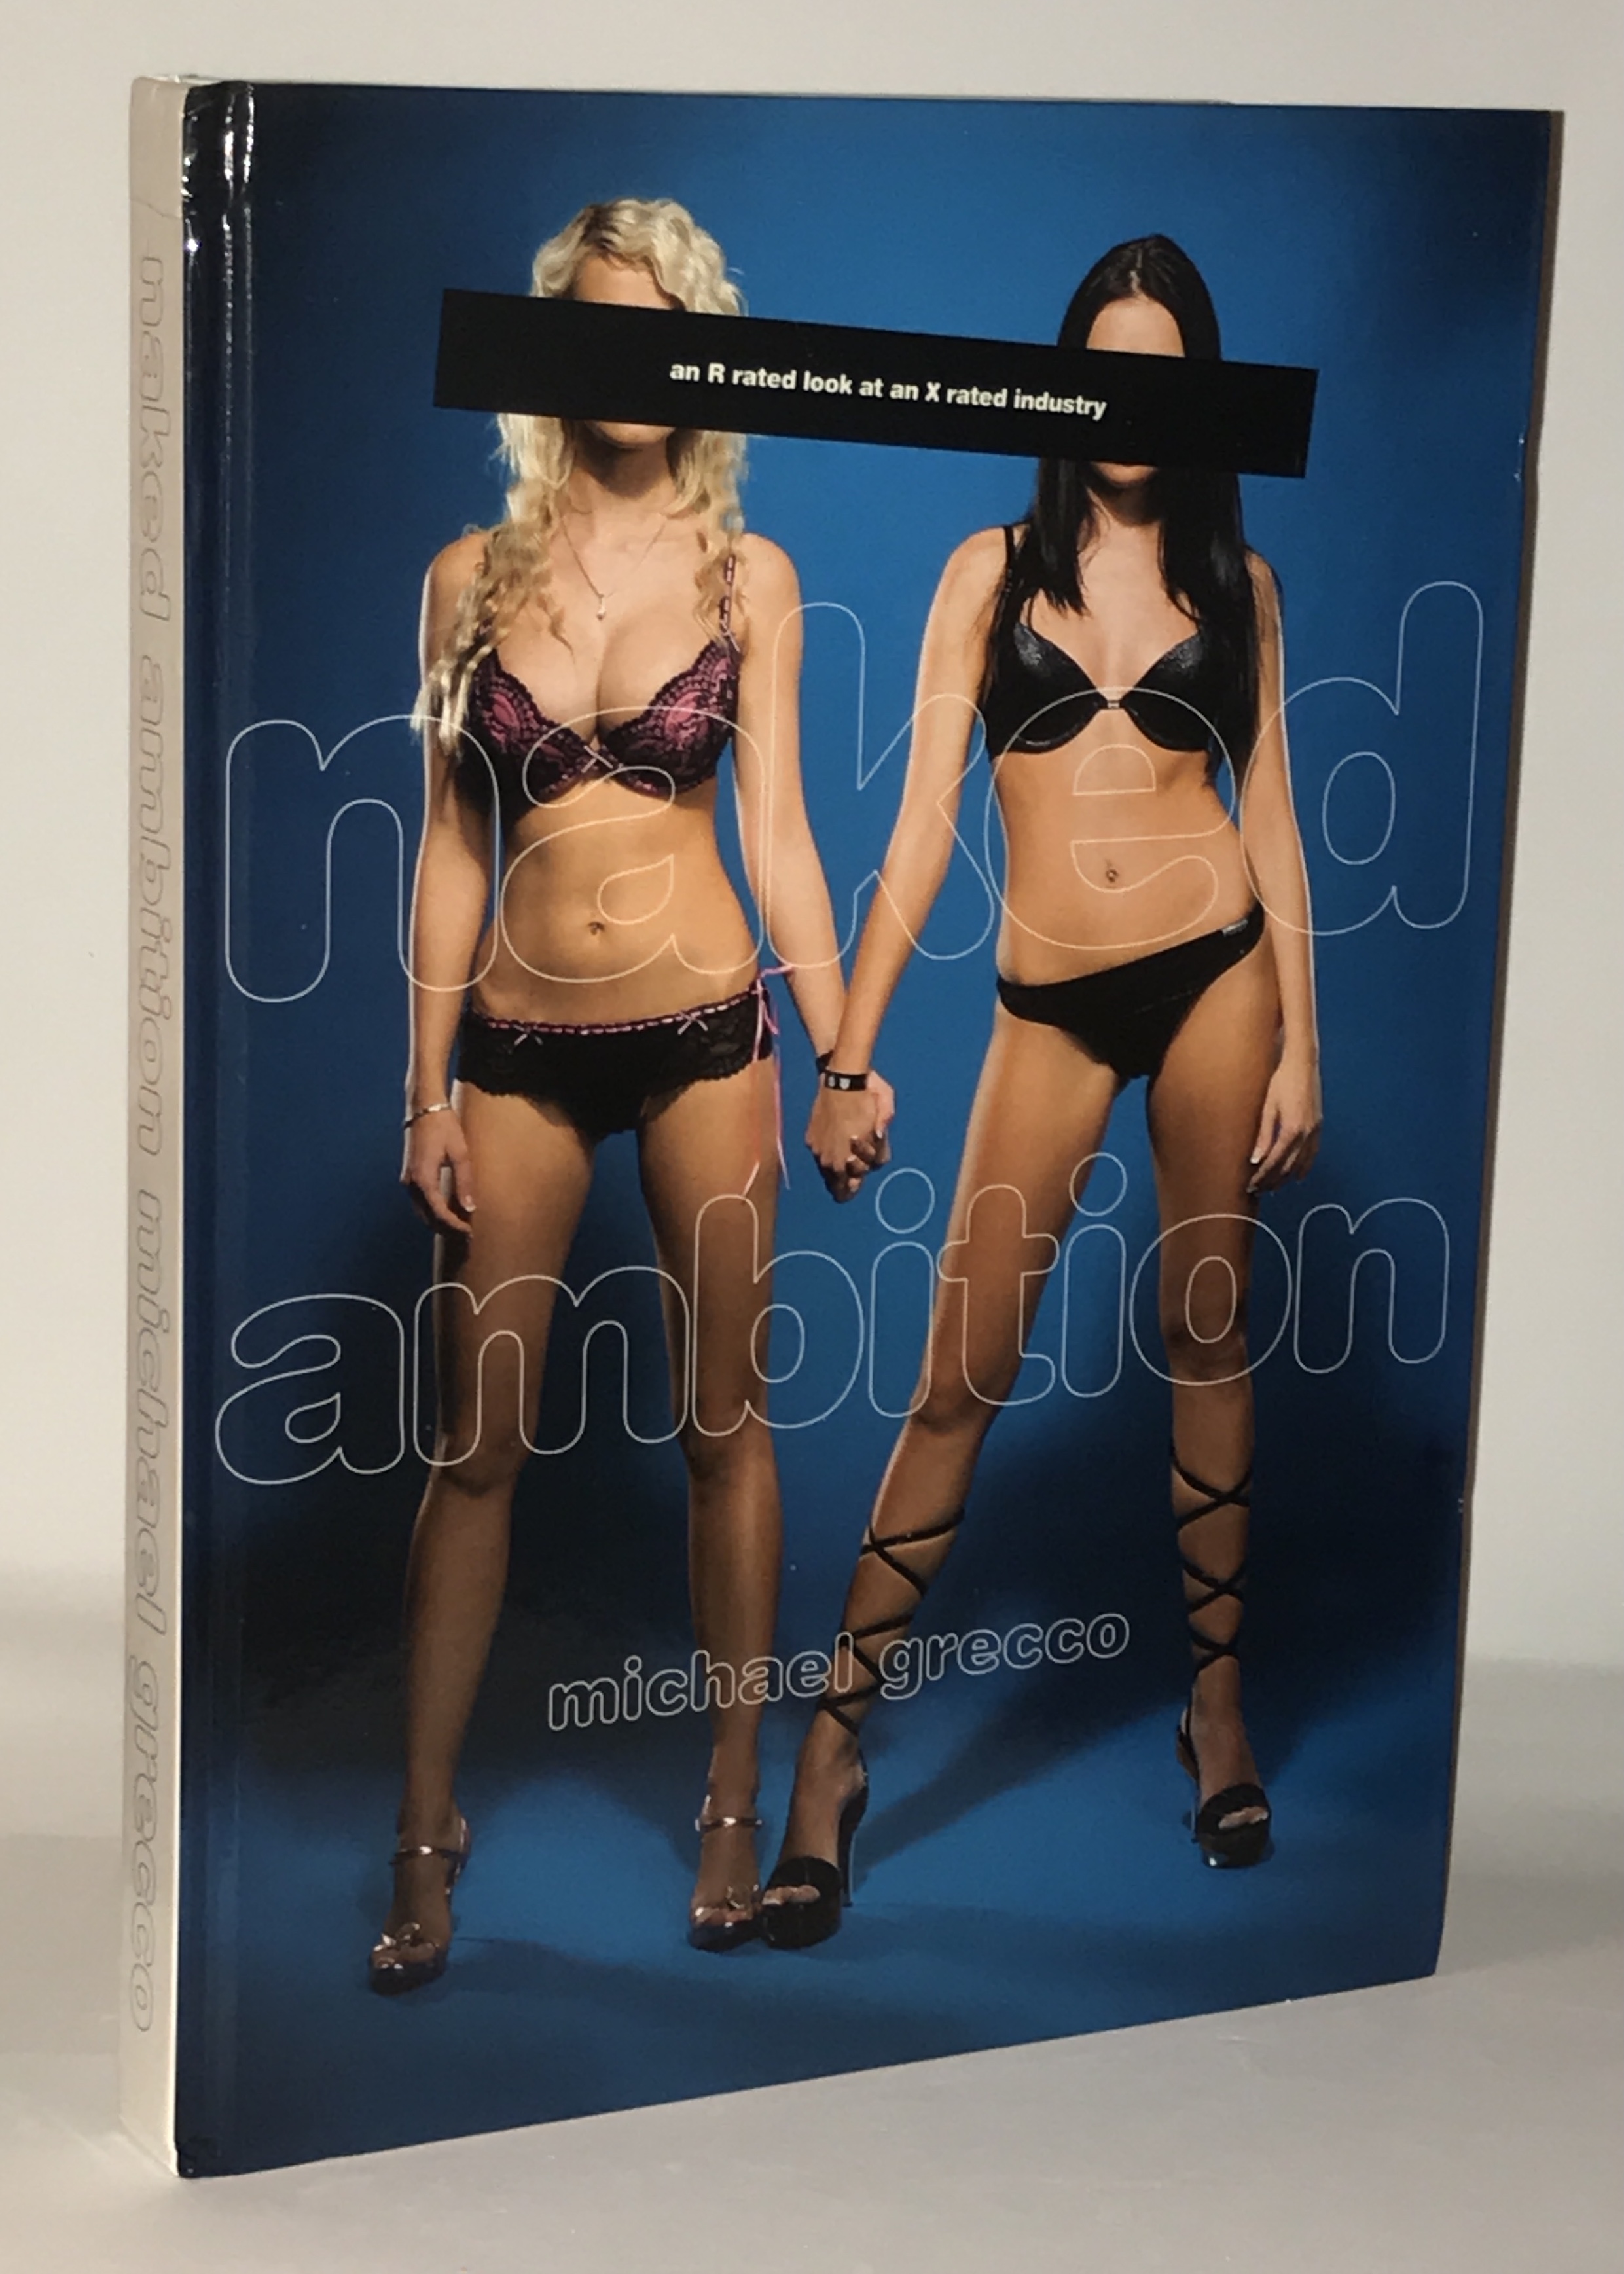 Naked Ambition: An R Rated Look at an X Rated Industry (First Edition) by  Michael Grecco (author); Larry Flynt; Dave Navarro (foreword); Lonn Friend;  Rob Hill (editors): As New Soft cover (2007)